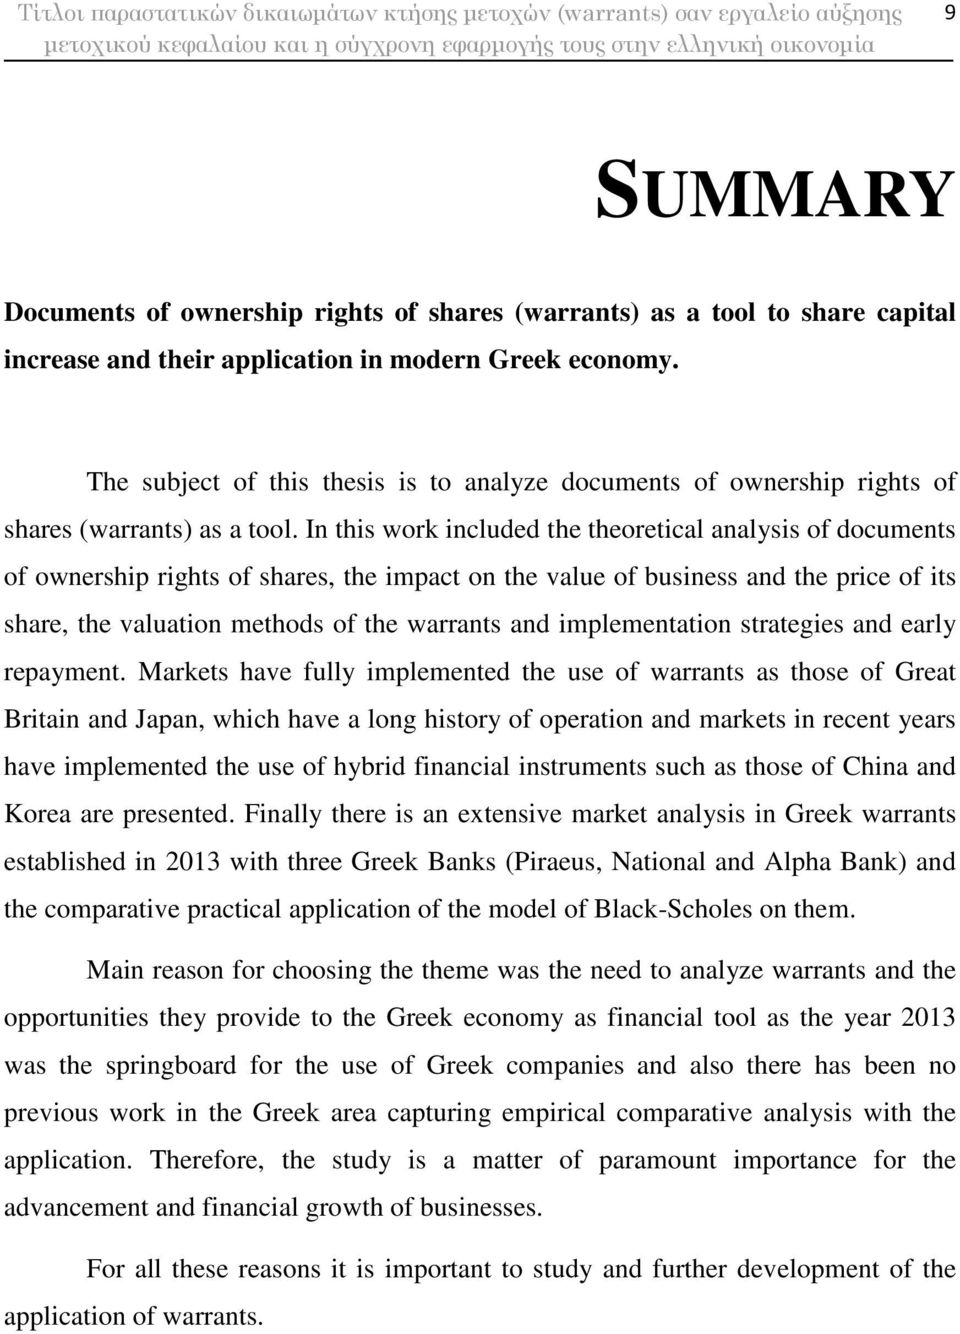 In this work included the theoretical analysis of documents of ownership rights of shares, the impact on the value of business and the price of its share, the valuation methods of the warrants and